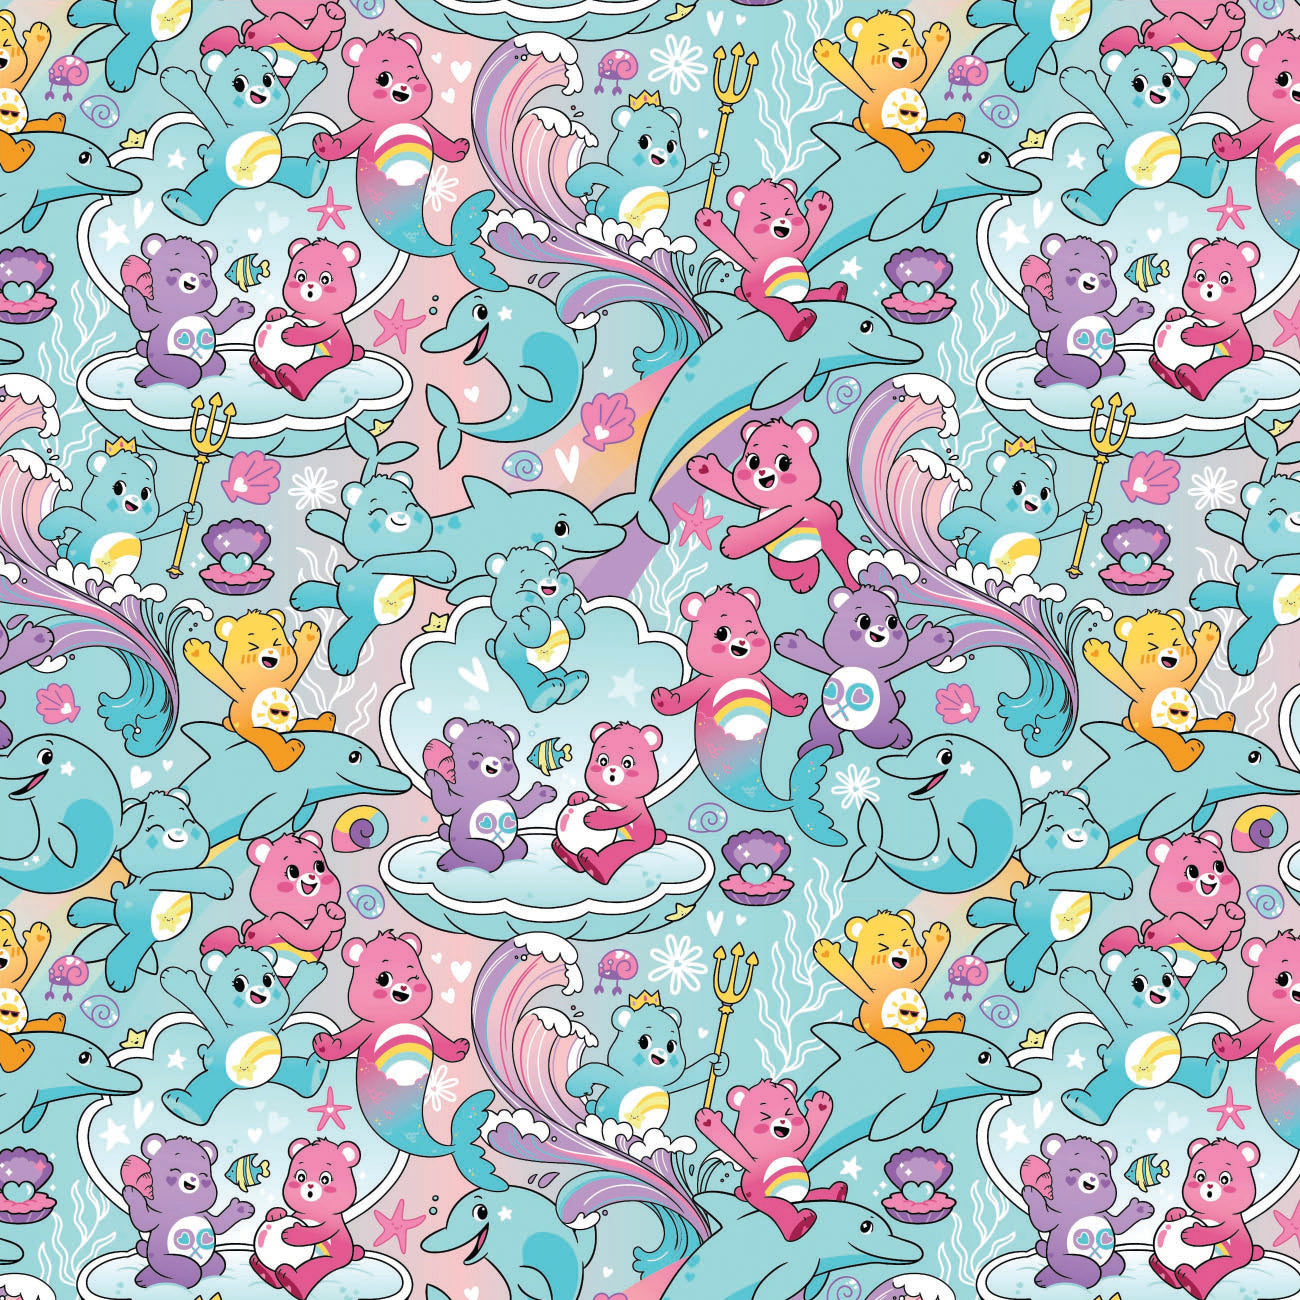 Care Bears Mer Bears Collection - Ocean Bears Care - Pink - Cotton 44010802-03